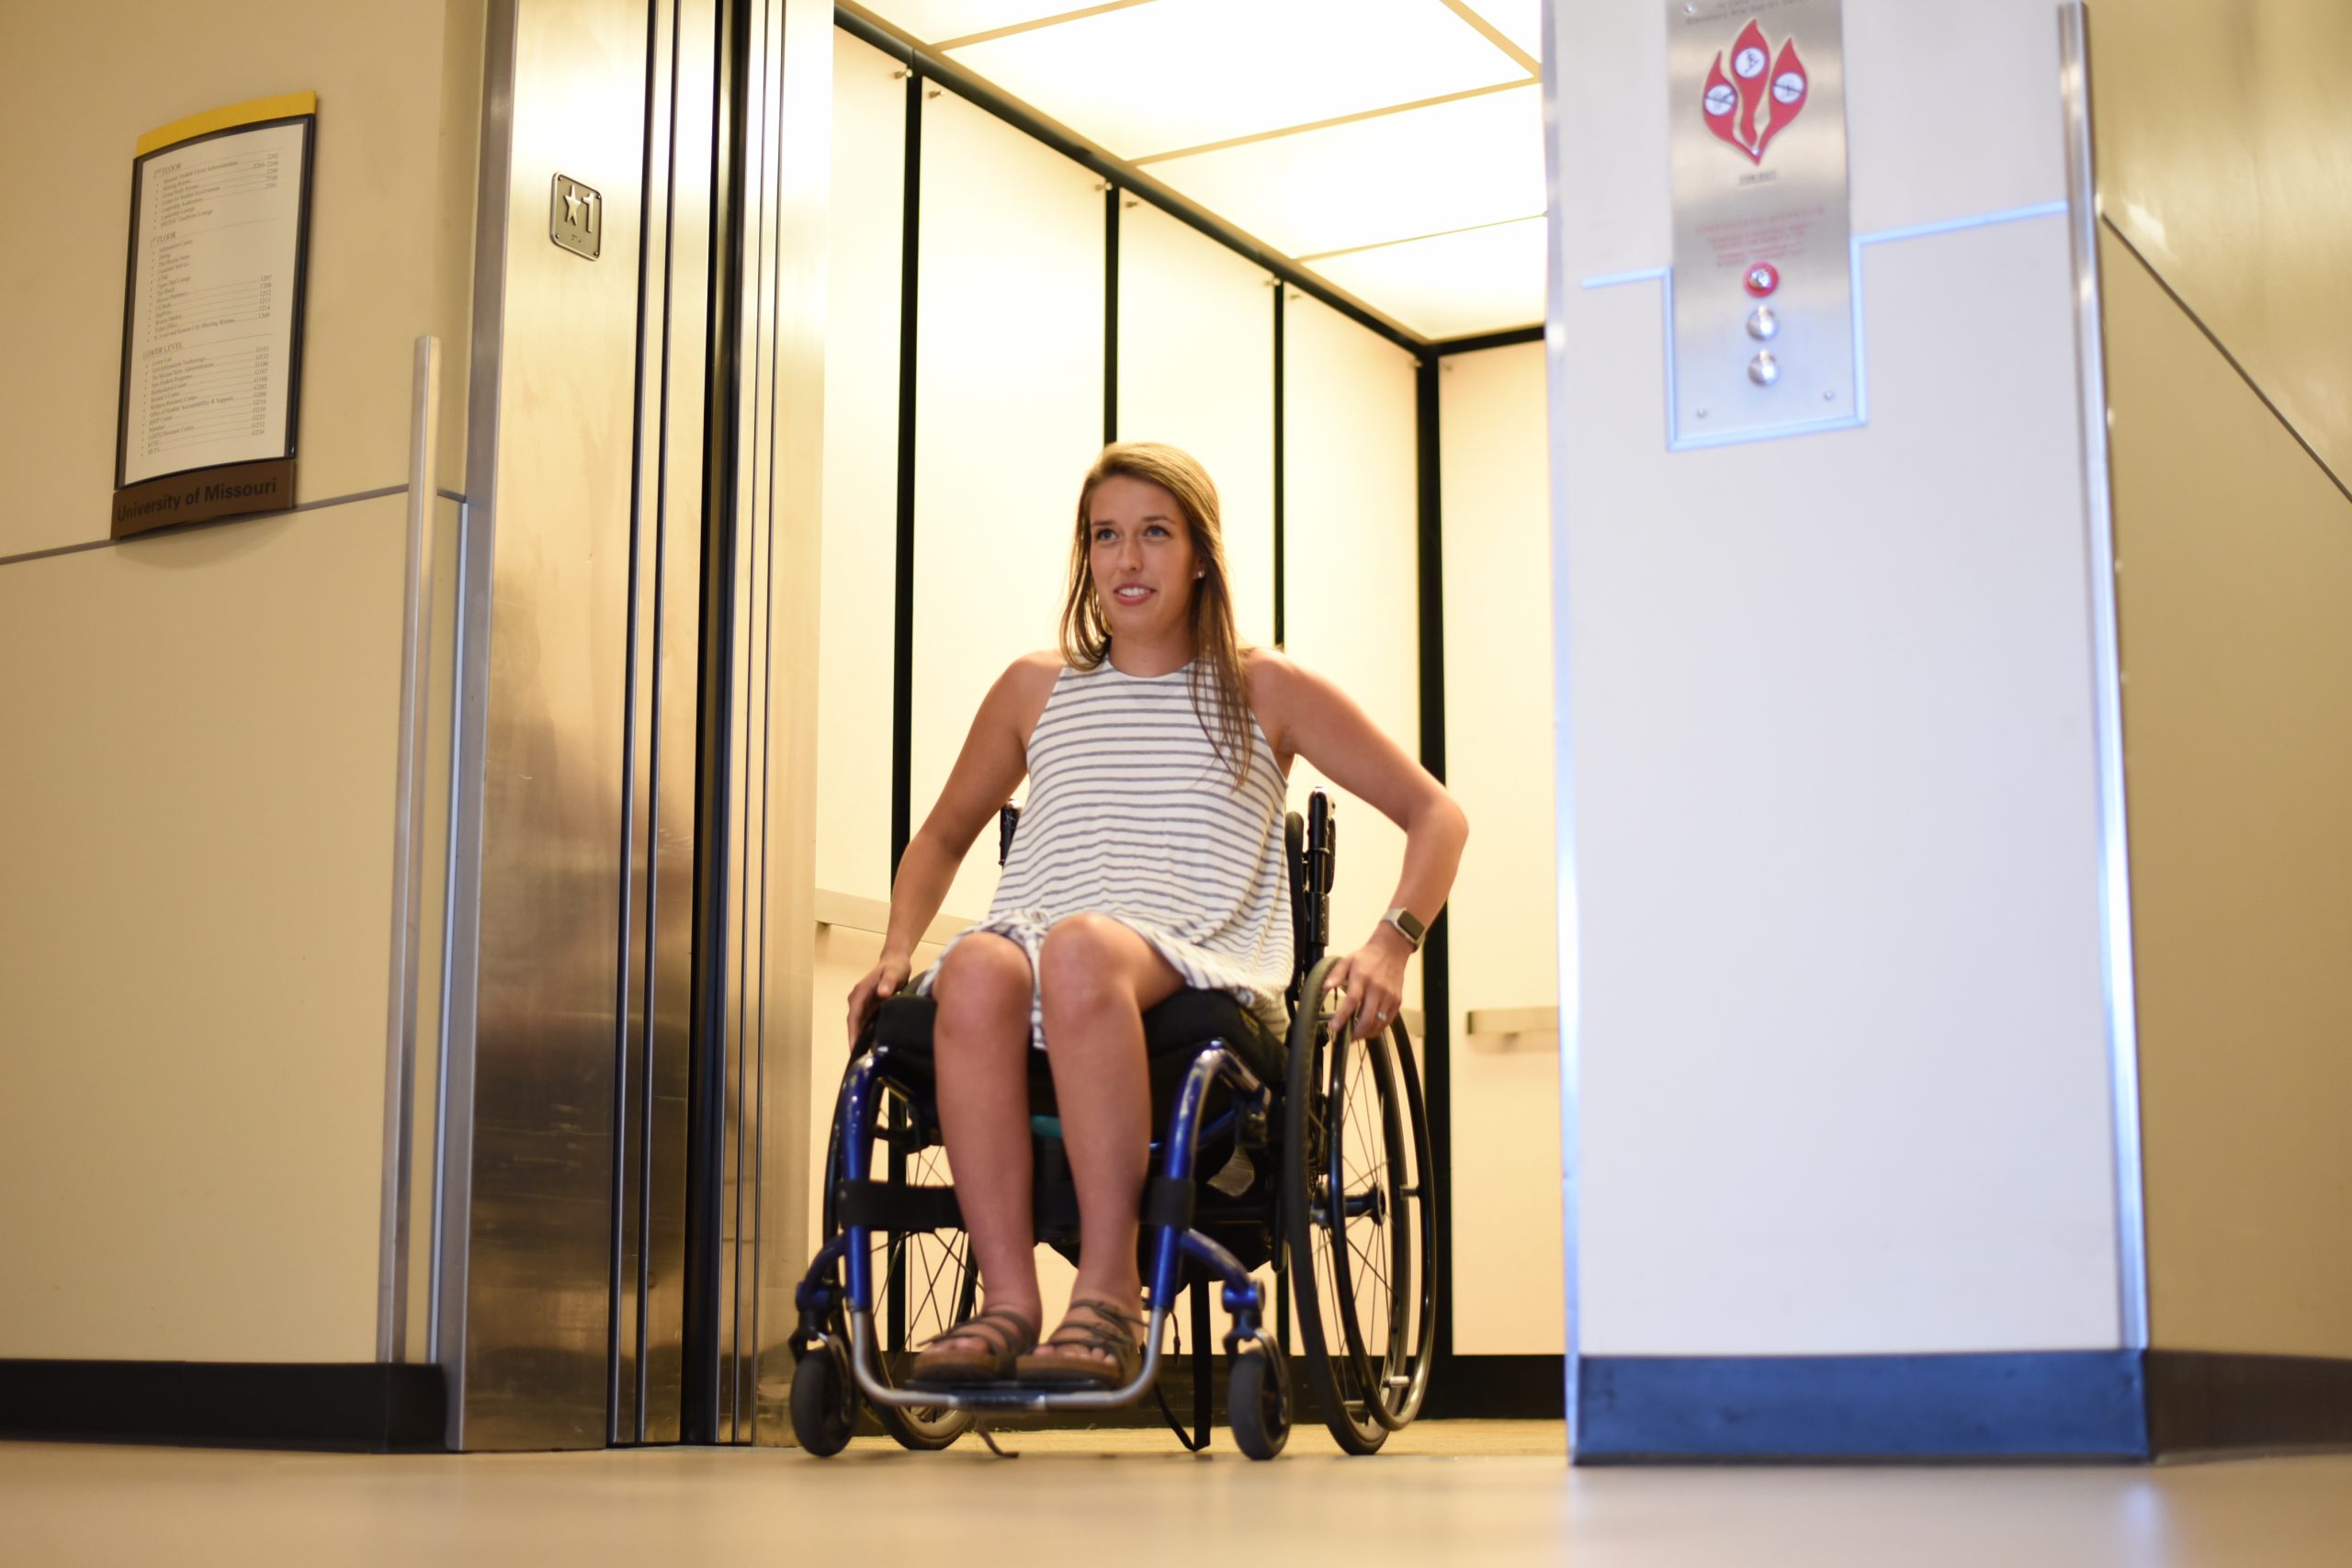 This is a picture of a student in a wheelchair exiting an elevator.